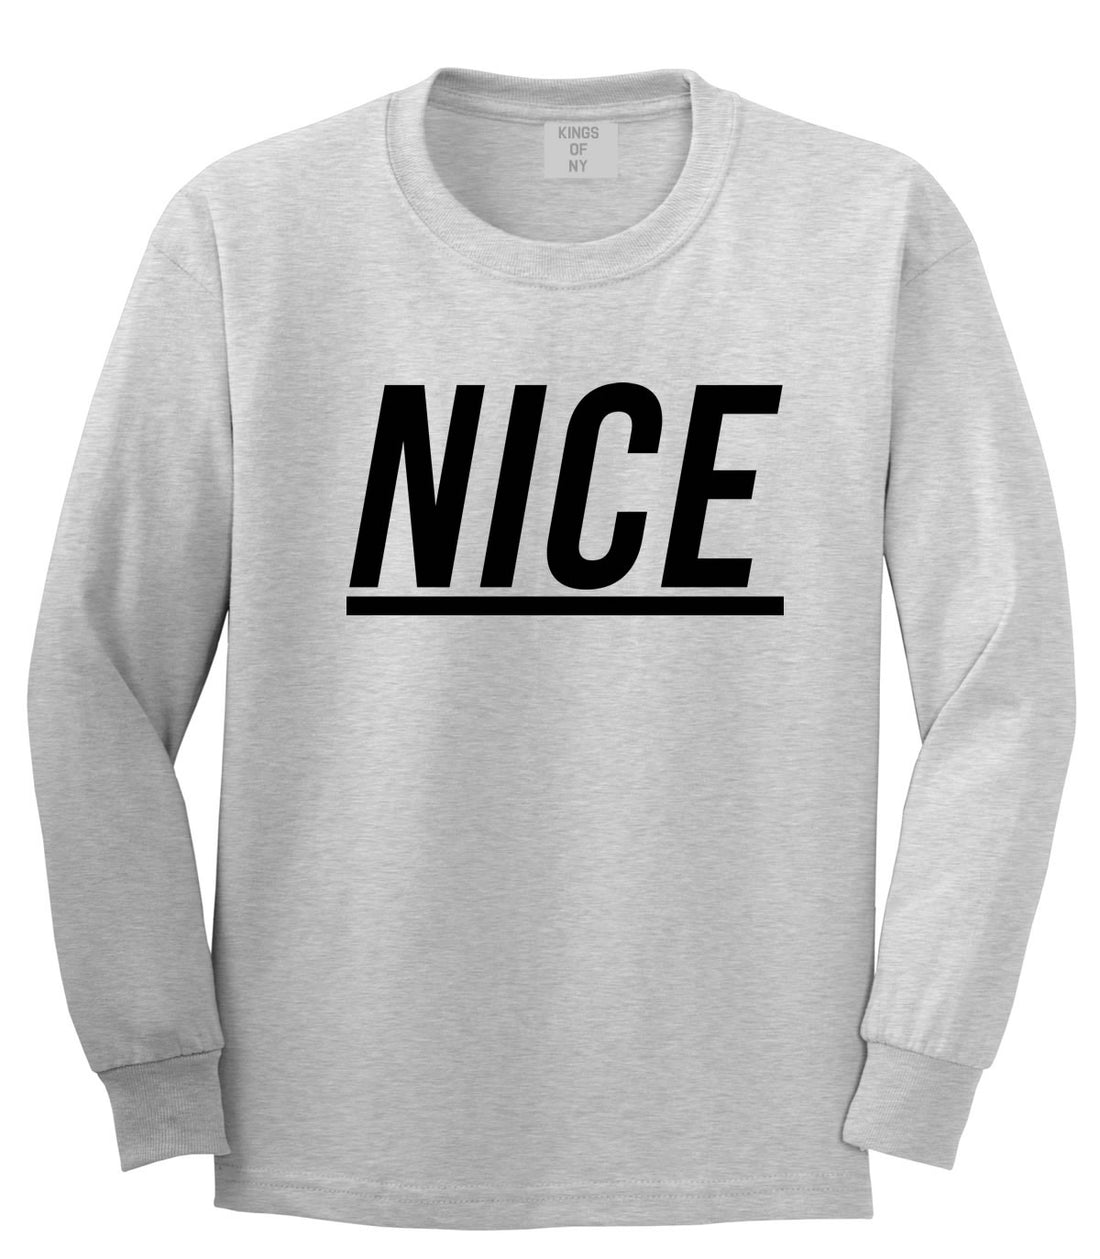 Nice Long Sleeve T-Shirt in Grey by Kings Of NY